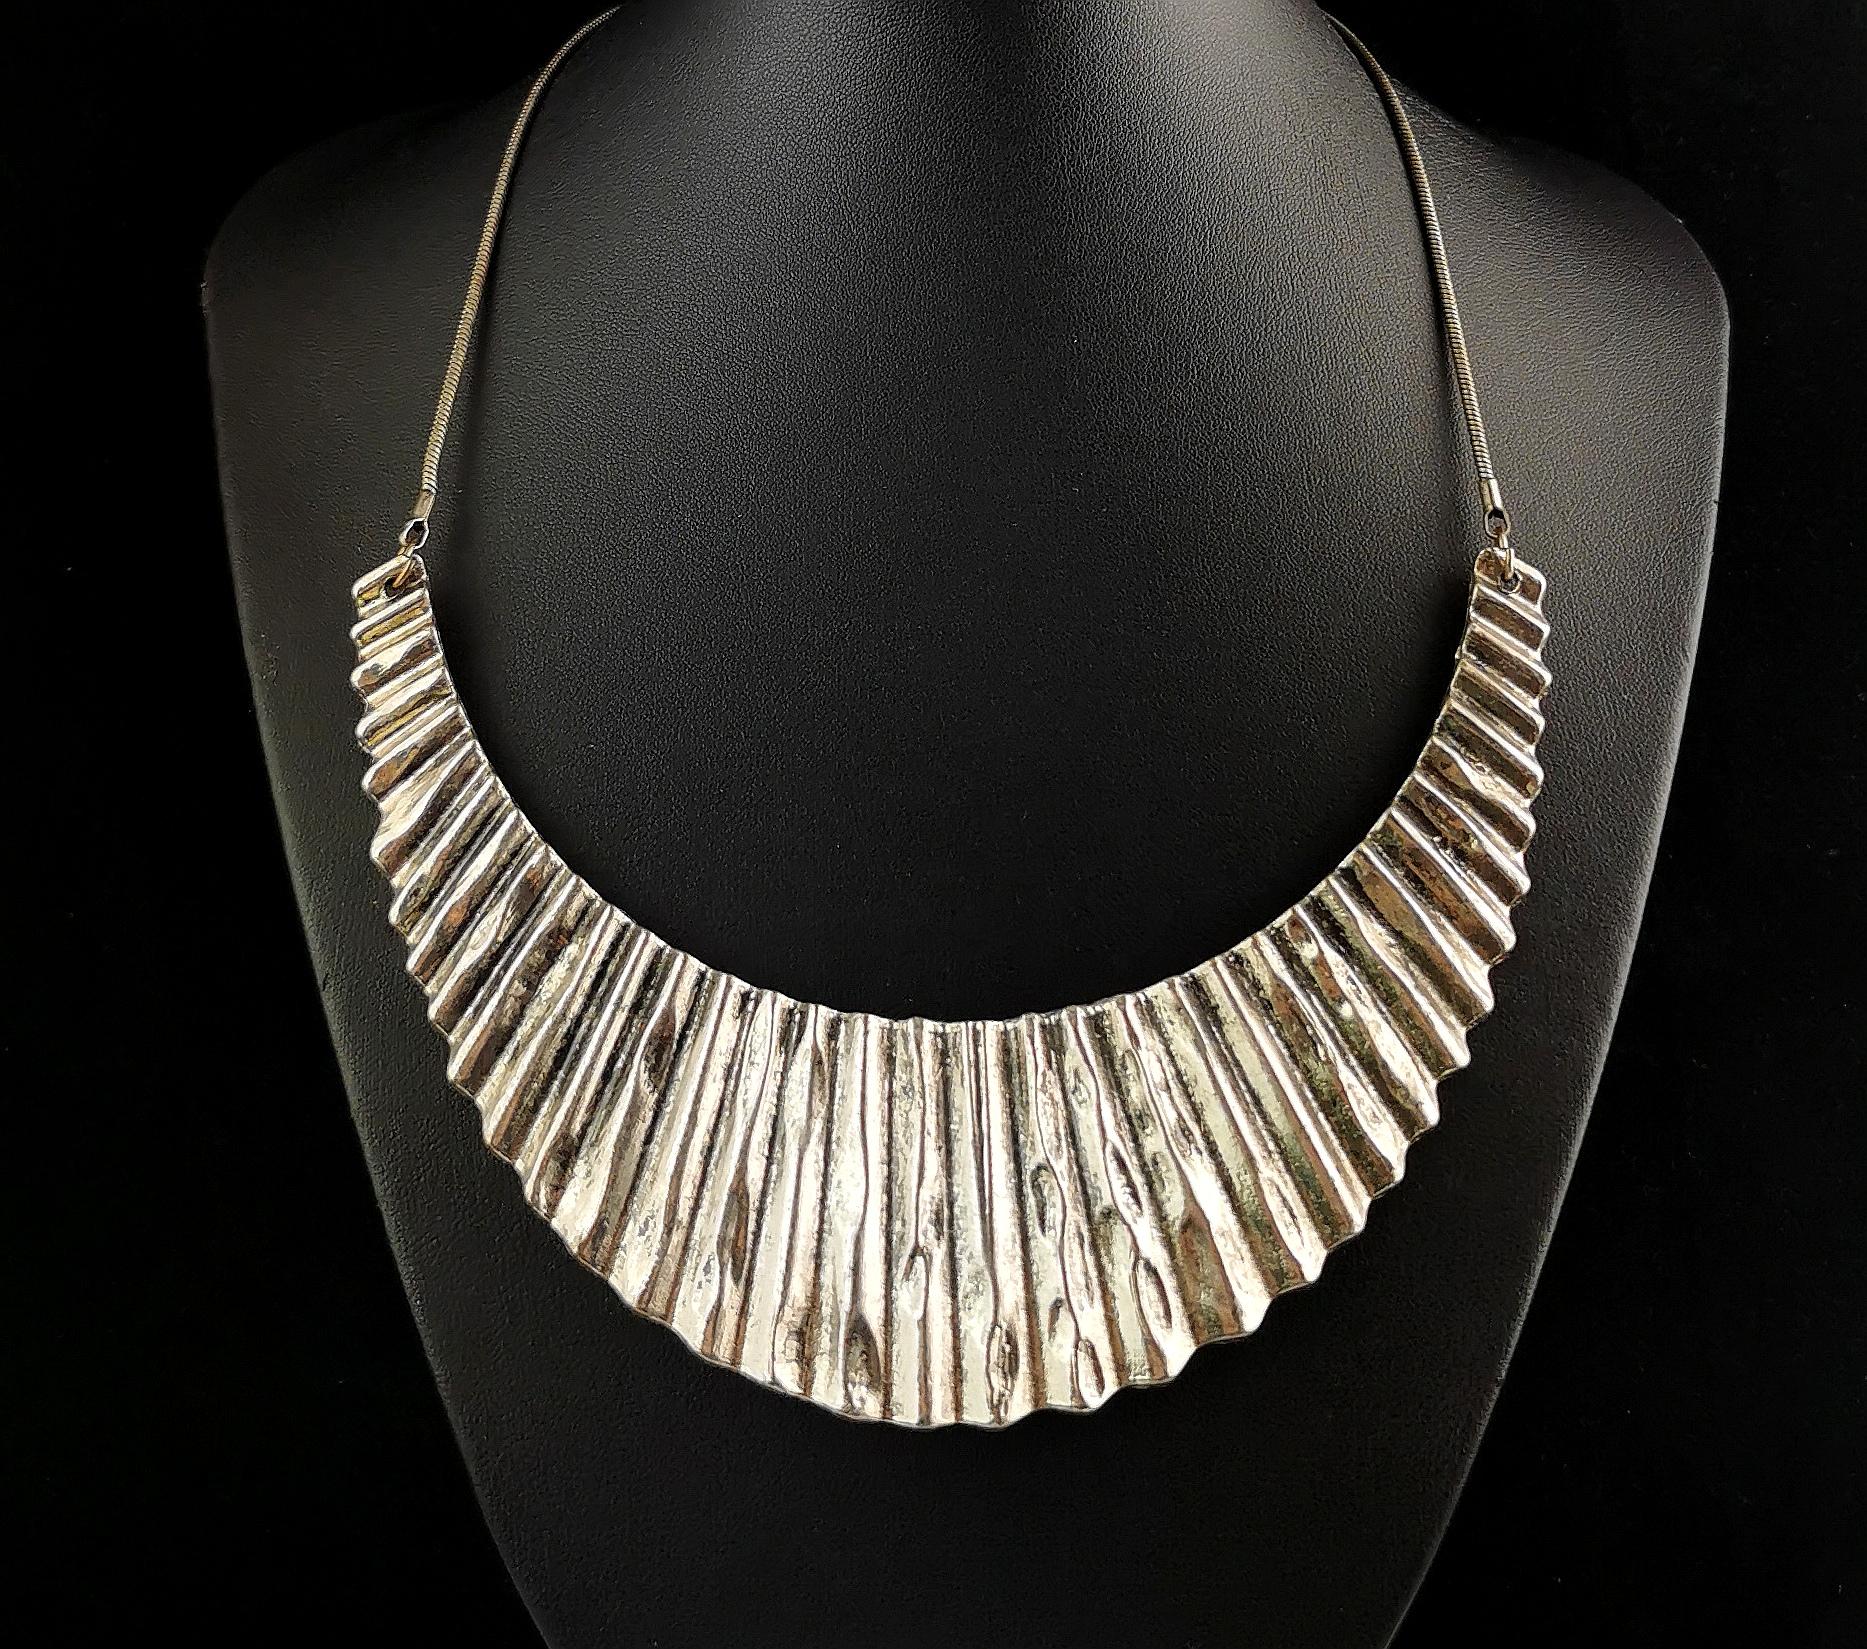 A striking vintage Brutalist style metal bib necklace.

The crescent shaped bib is made from rustic pleated steel with a weathered look and is adjoined with a base metal snake chain.

It is definitely a statement piece and really stands